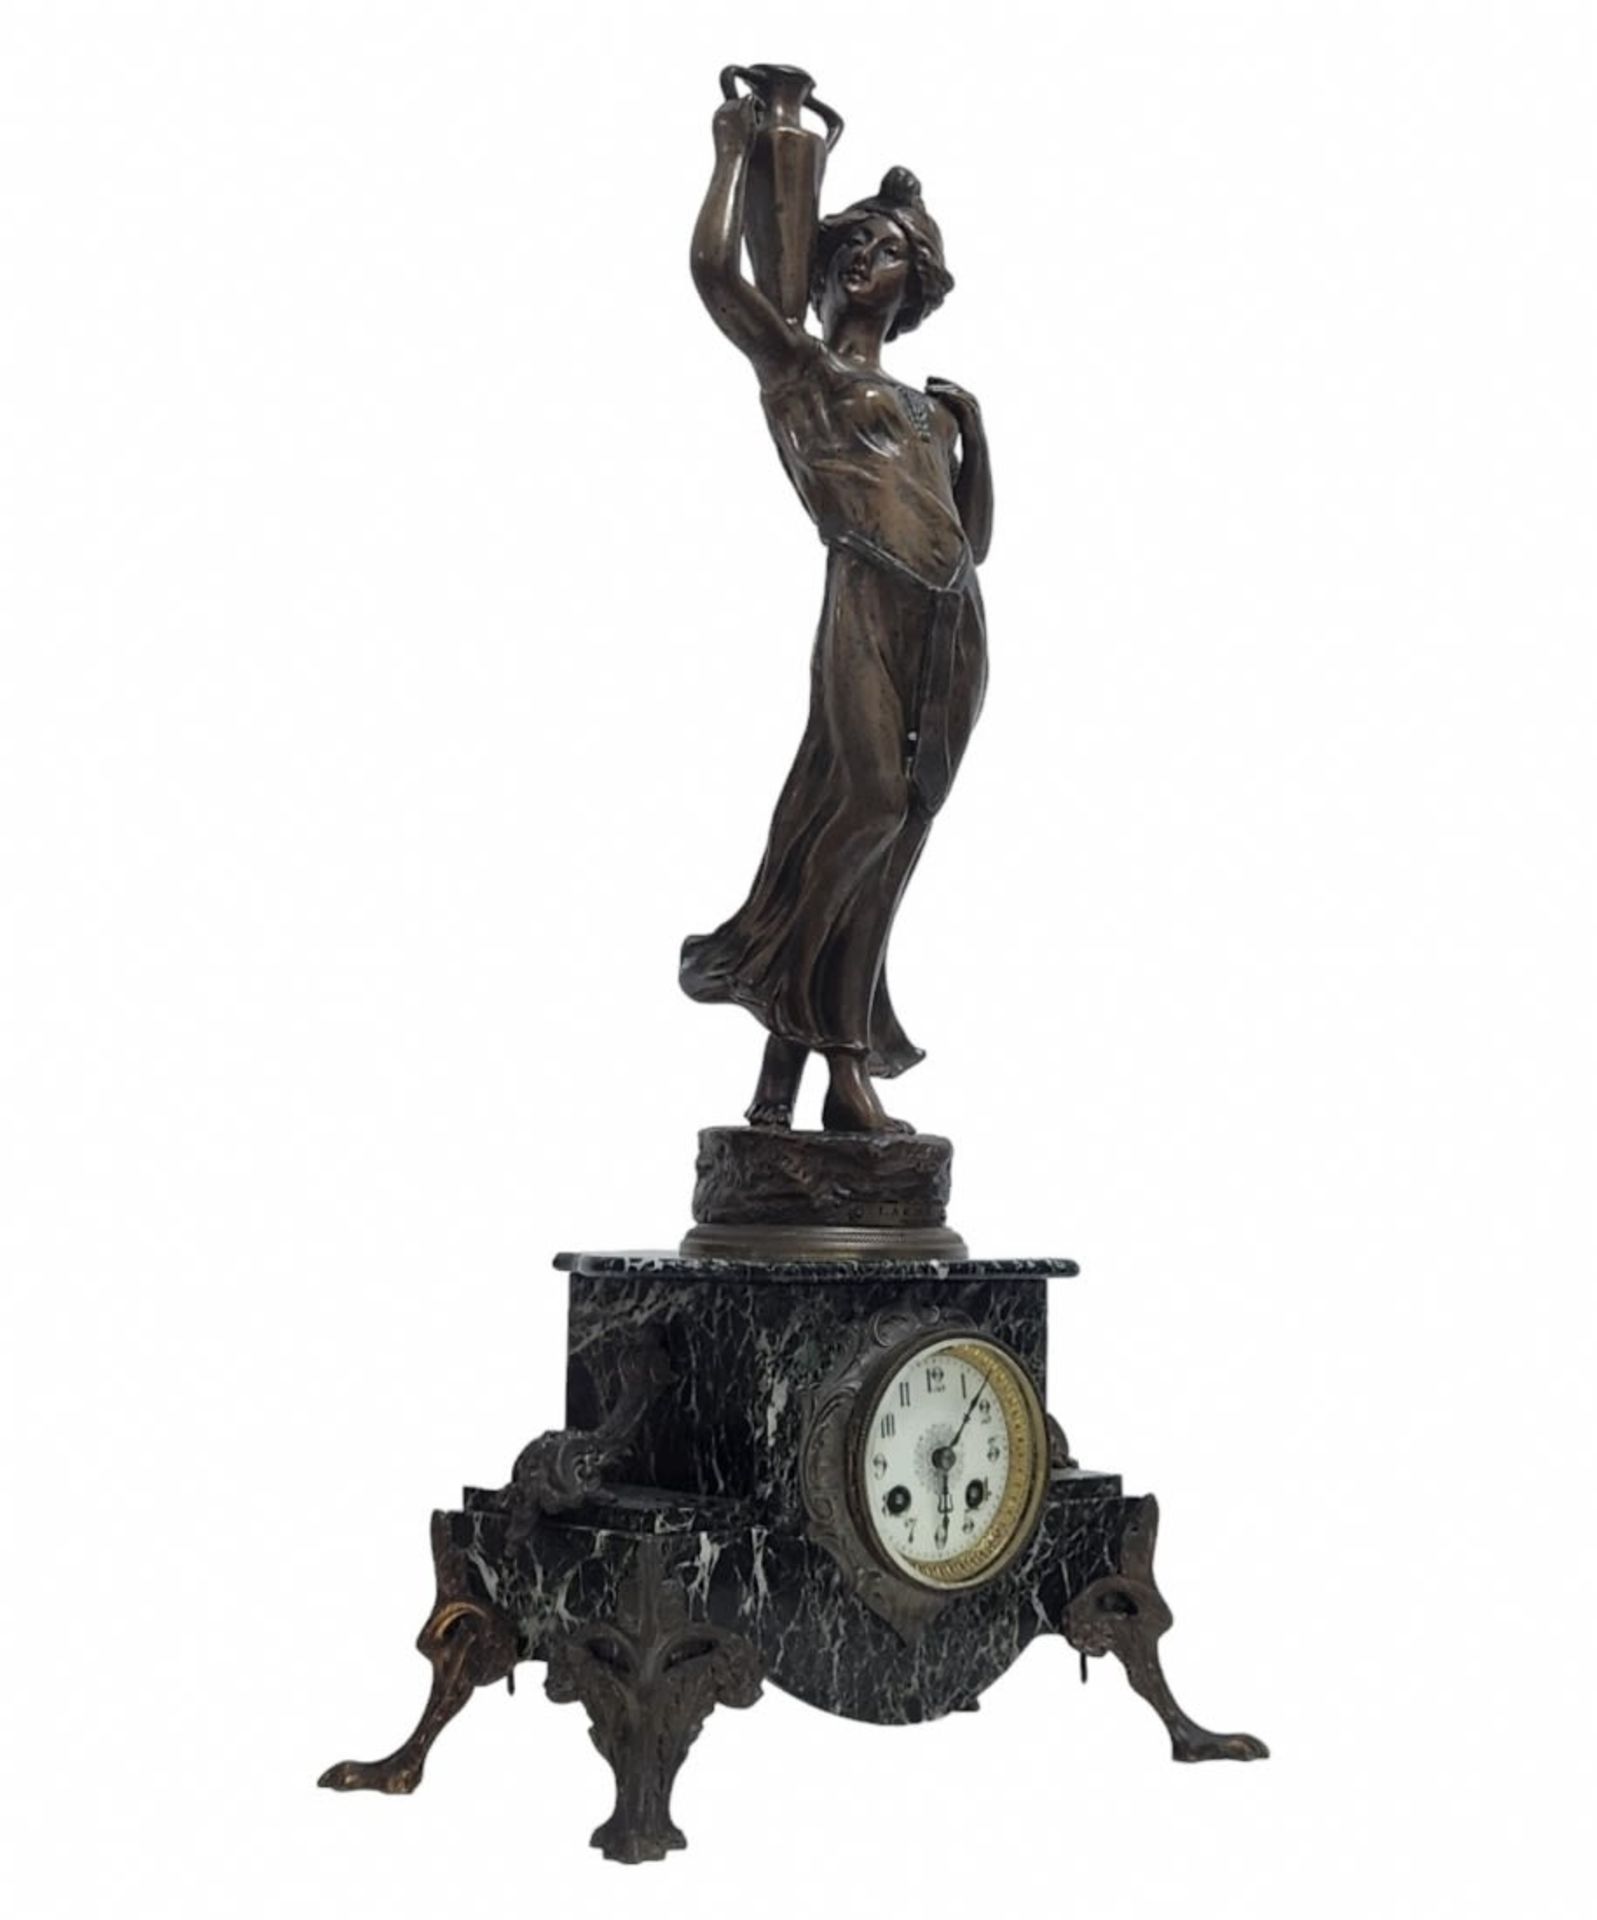 Antique French mantle clock, 19th century, made of mottled Egyptian granite marble and Spelter, - Image 4 of 11